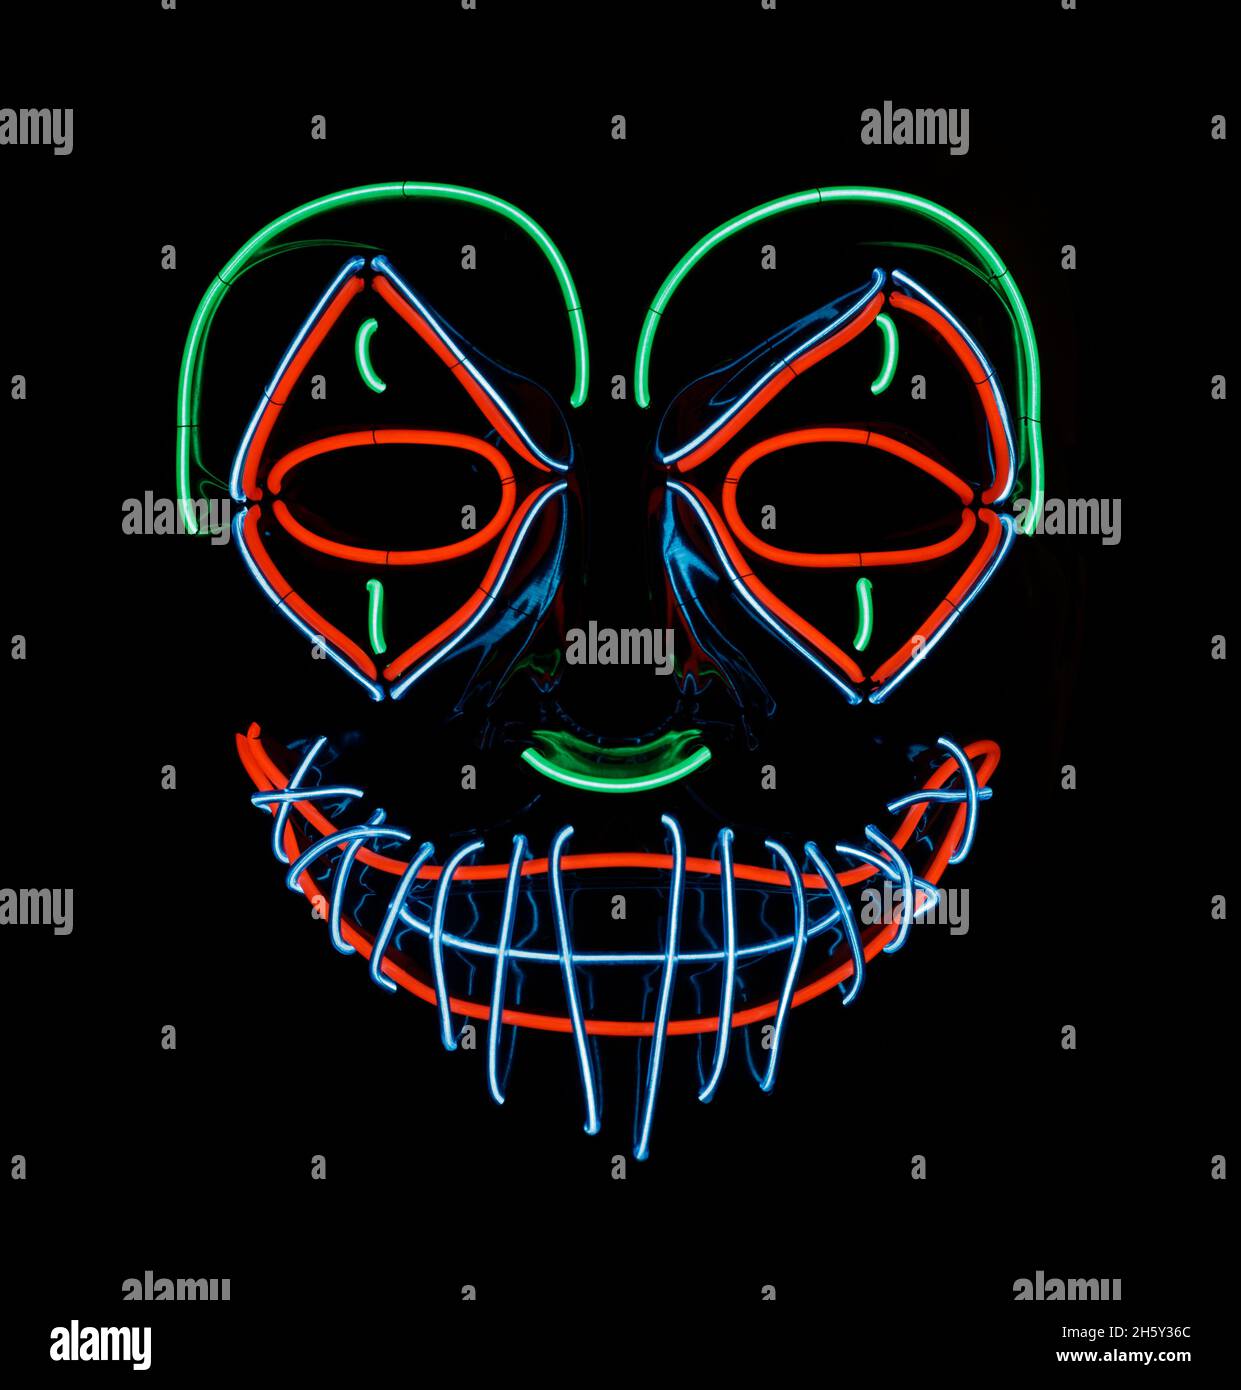 LED Scary Clown Mask Glowing in Red, Green, and Blue. Stock Photo